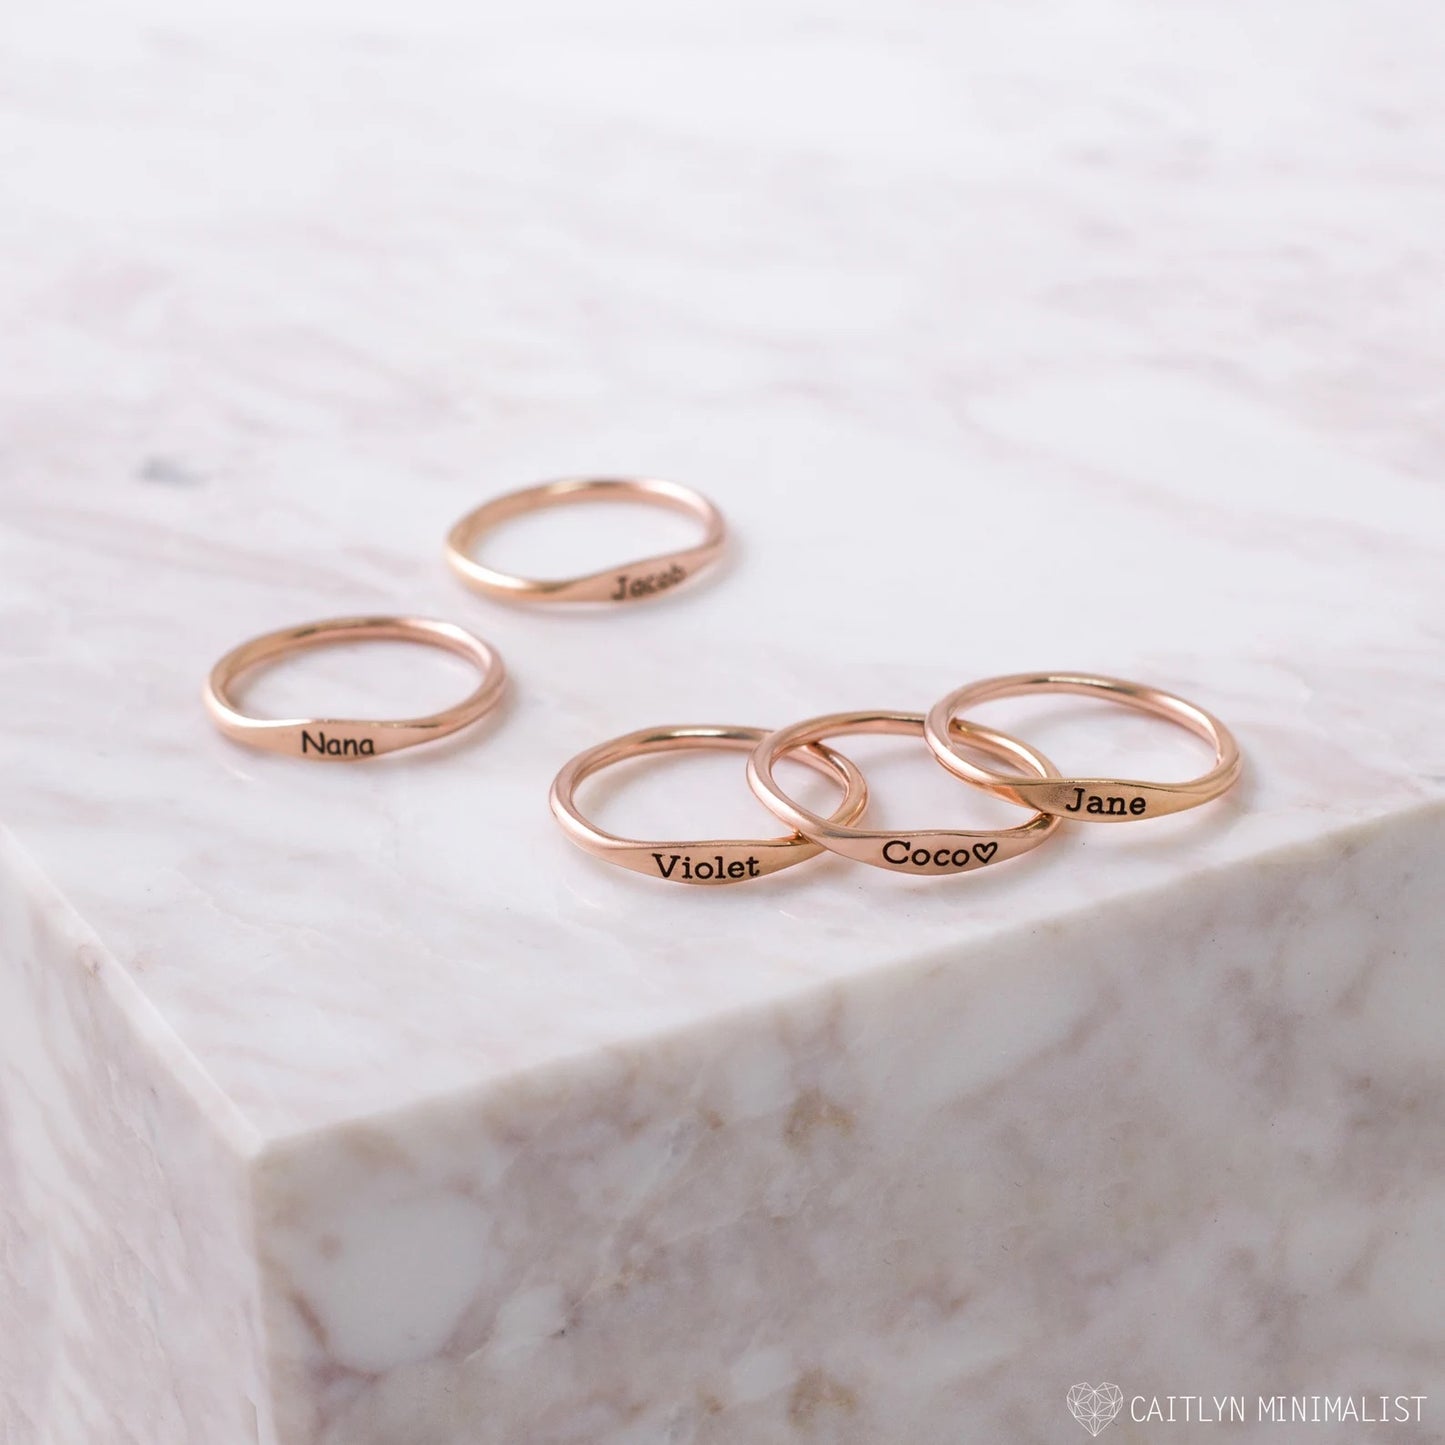 Name Ring - The Minimalist